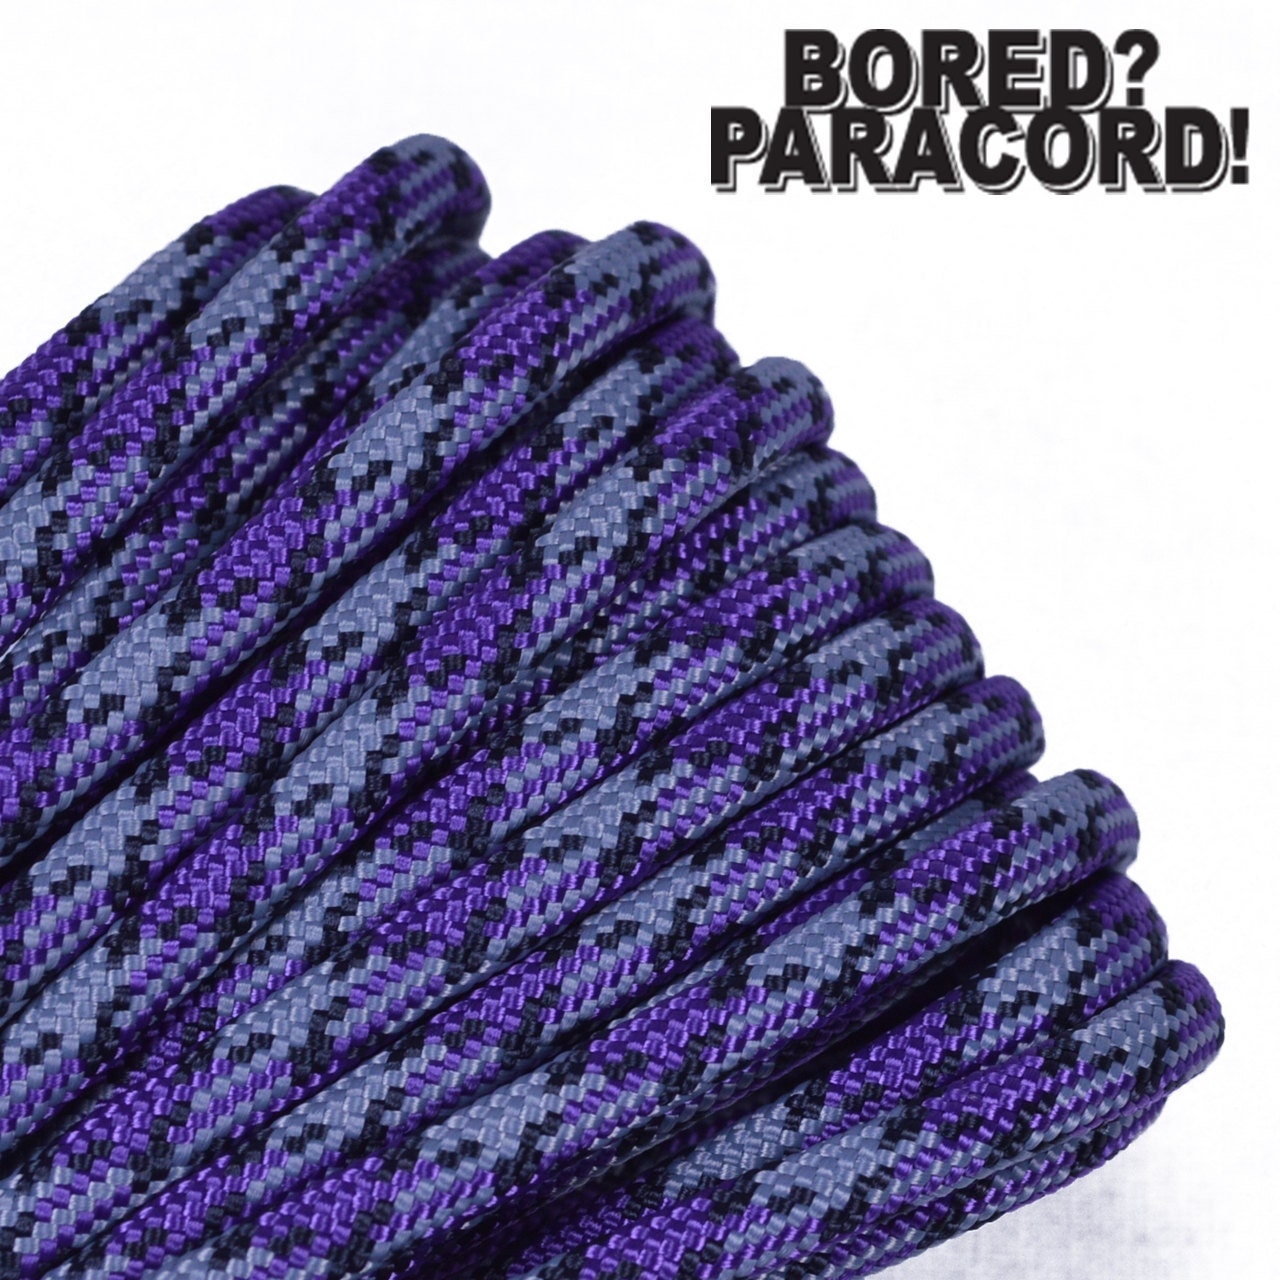 Mystique 100 Feet / 50 Feet / 25 Feet 550 Paracord for Paracord Crafts Made  in the United States 